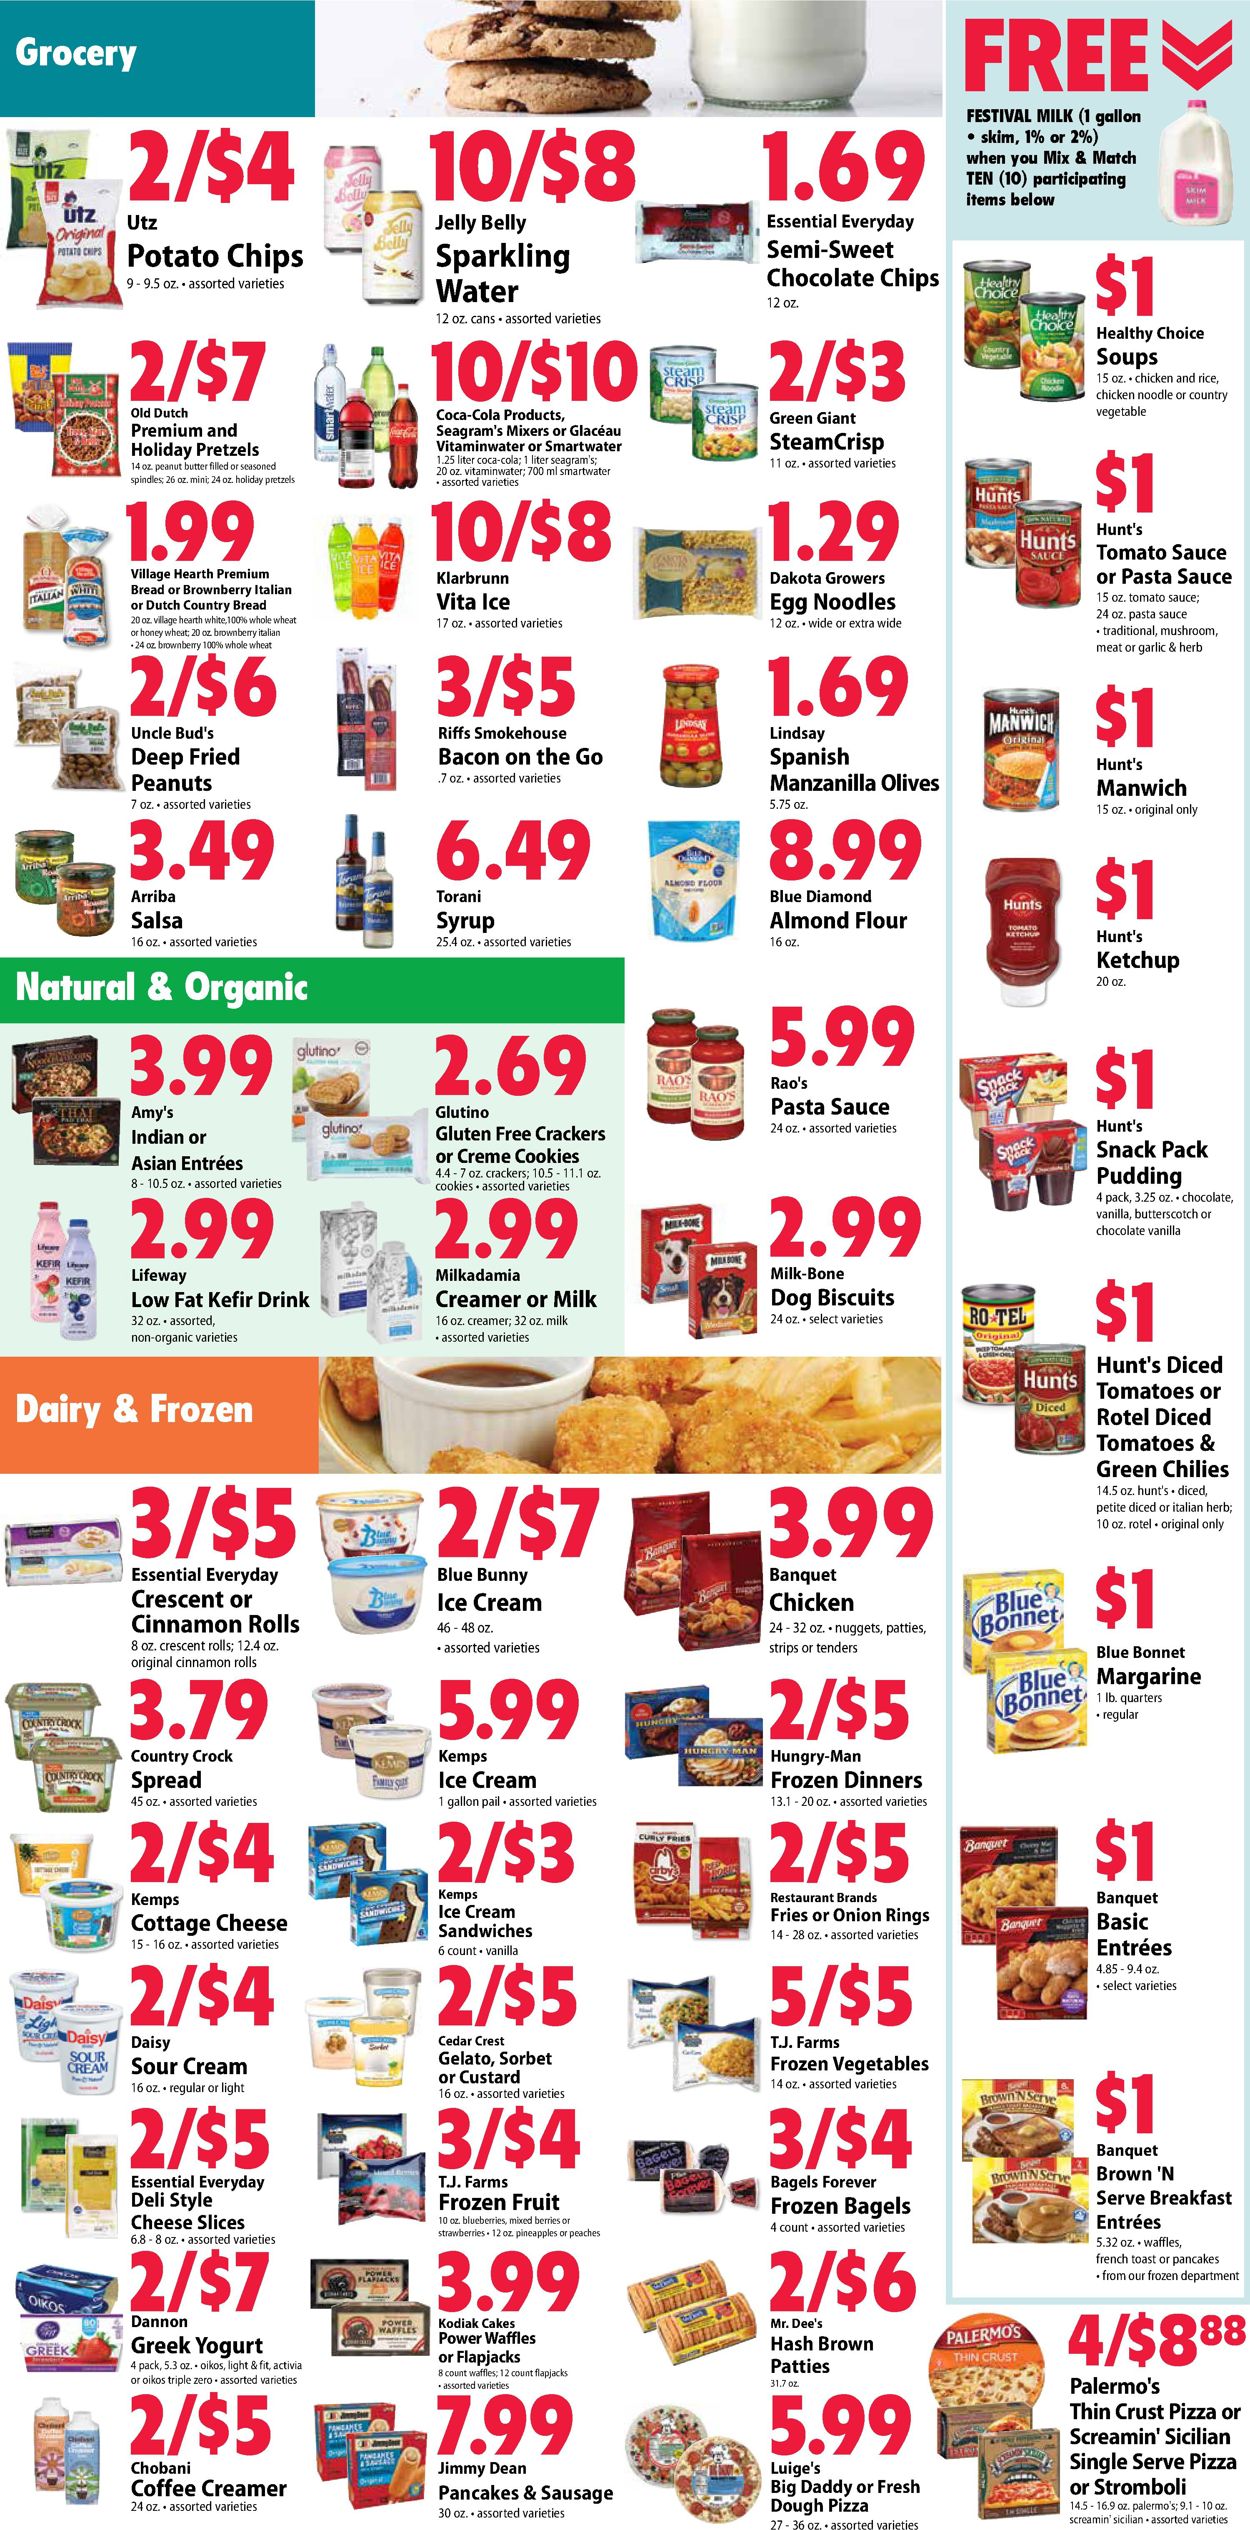 Festival Foods Black Friday 2020 Weekly Ad Circular - valid 11/25-12/01/2020 (Page 3)